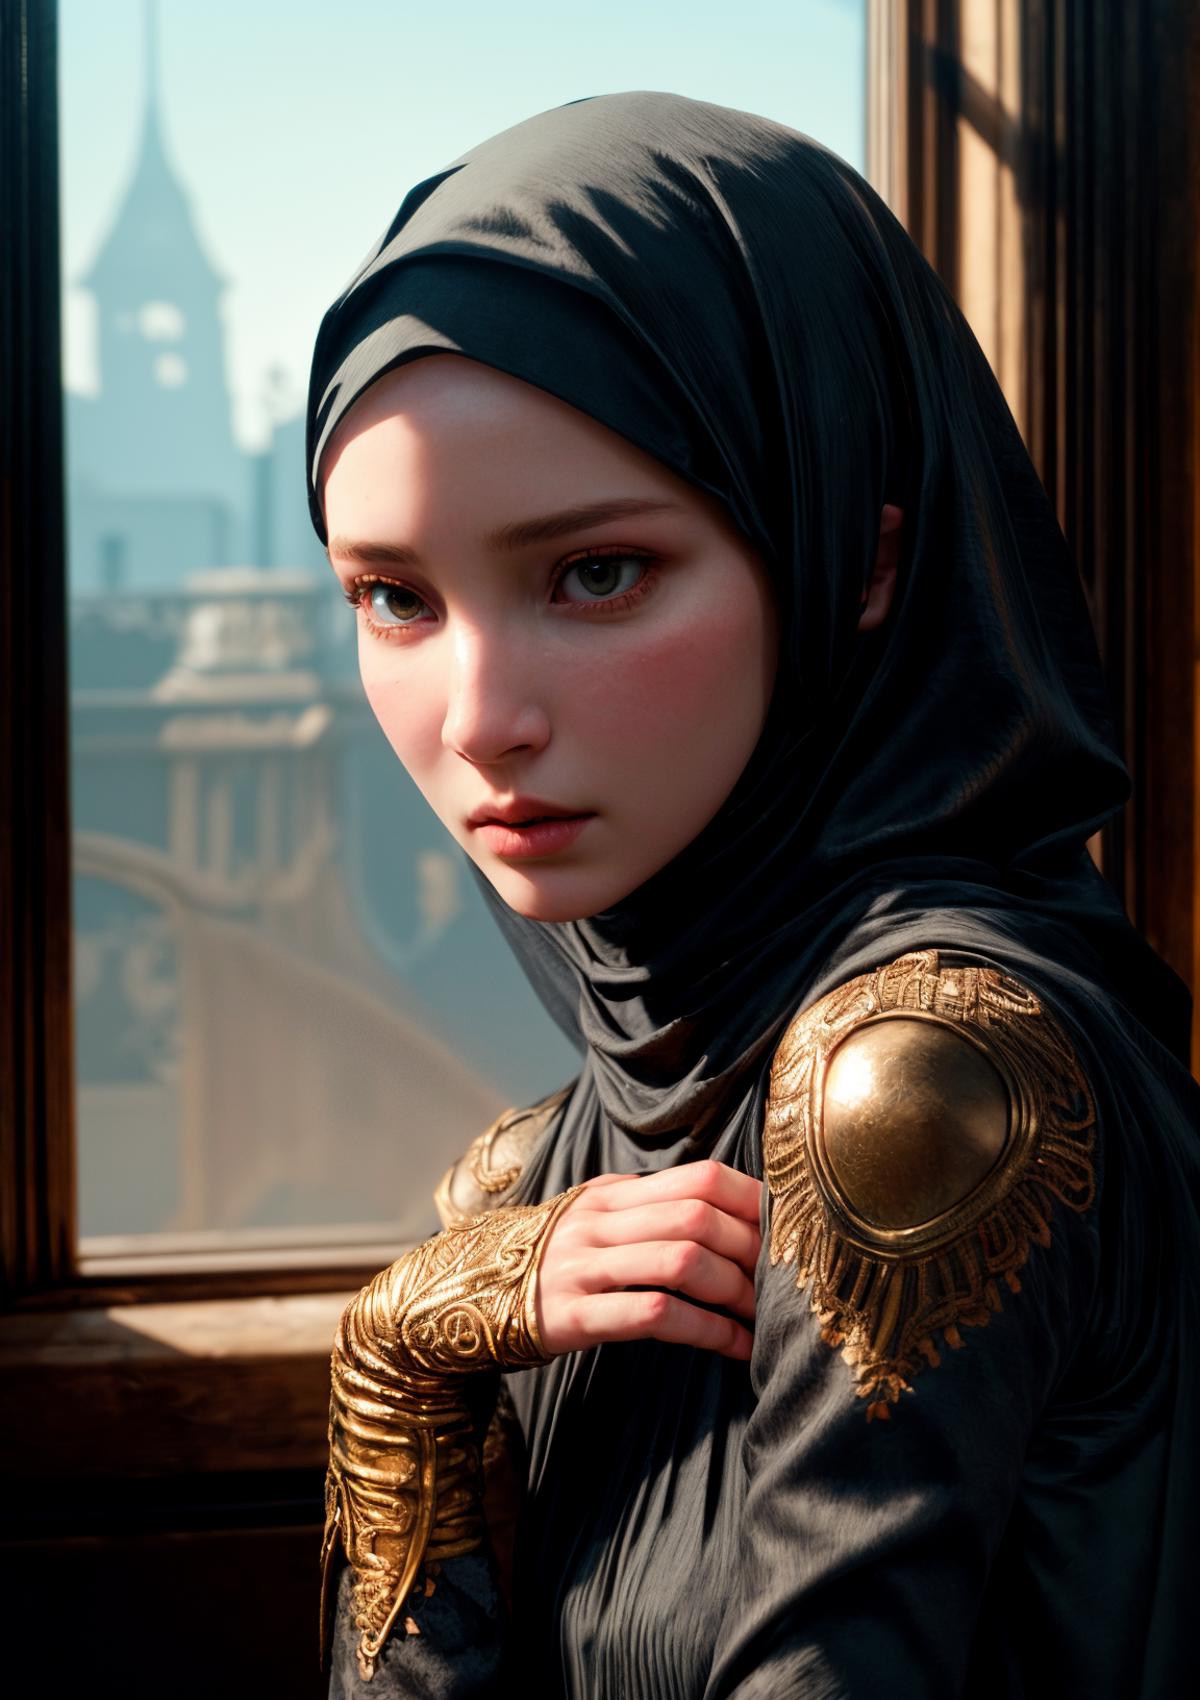 A young girl wearing a black hijab with gold accents, looking out a window.